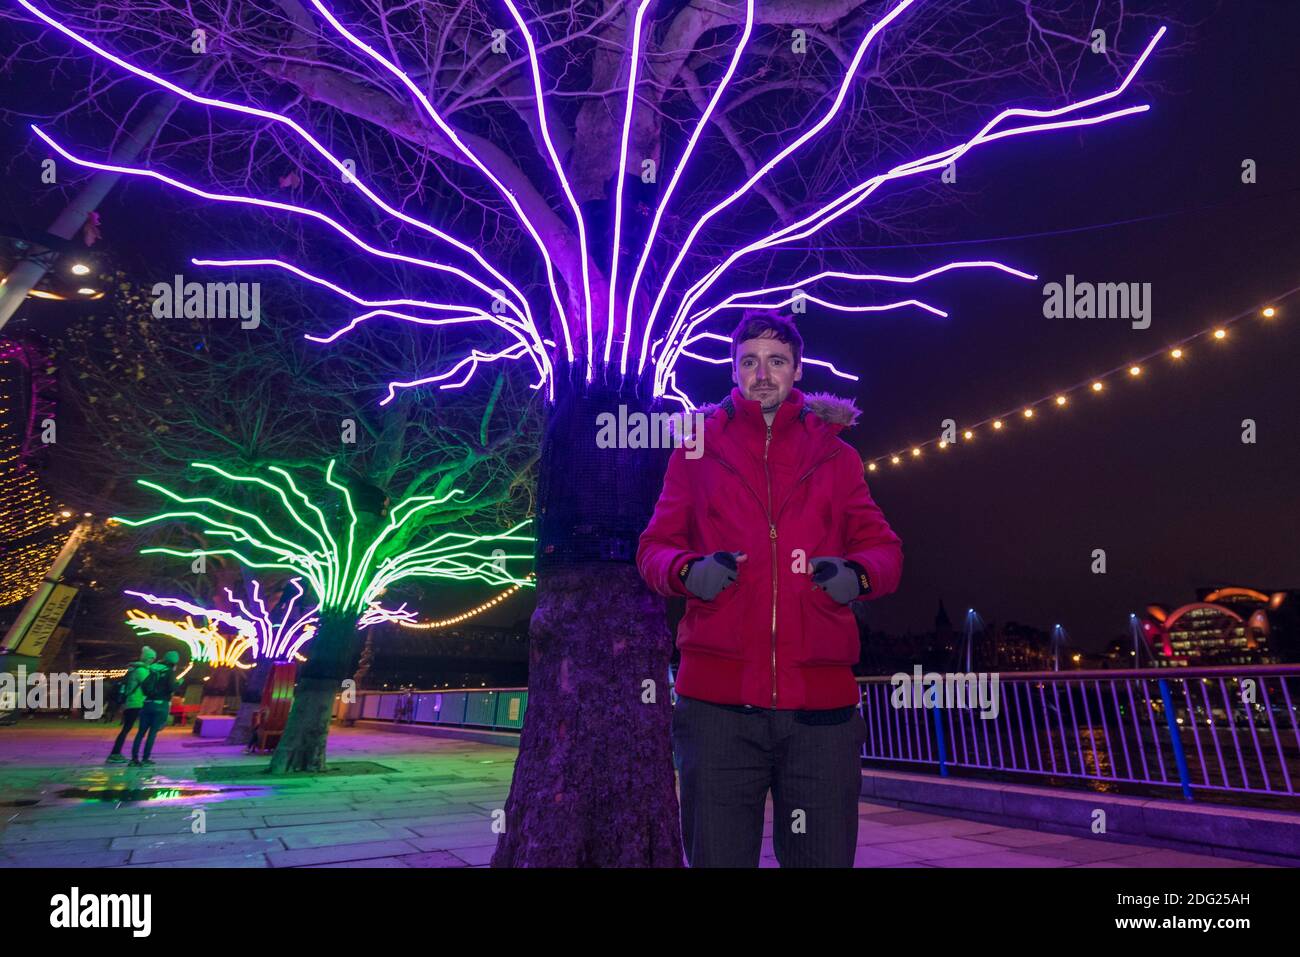 London, UK.  7 December 2020. Artist David Ogle in front of his work 'Lumen', trees illuminated with glowing neon flex. Preview of “Winter Light” presented by Southbank Centre.  Over 15 artworks and new illuminated commissions by a range of leading international artists are on display around the site’s buildings and the Riverside Walk until the end of February 2021. Credit: Stephen Chung / Alamy Live News Stock Photo